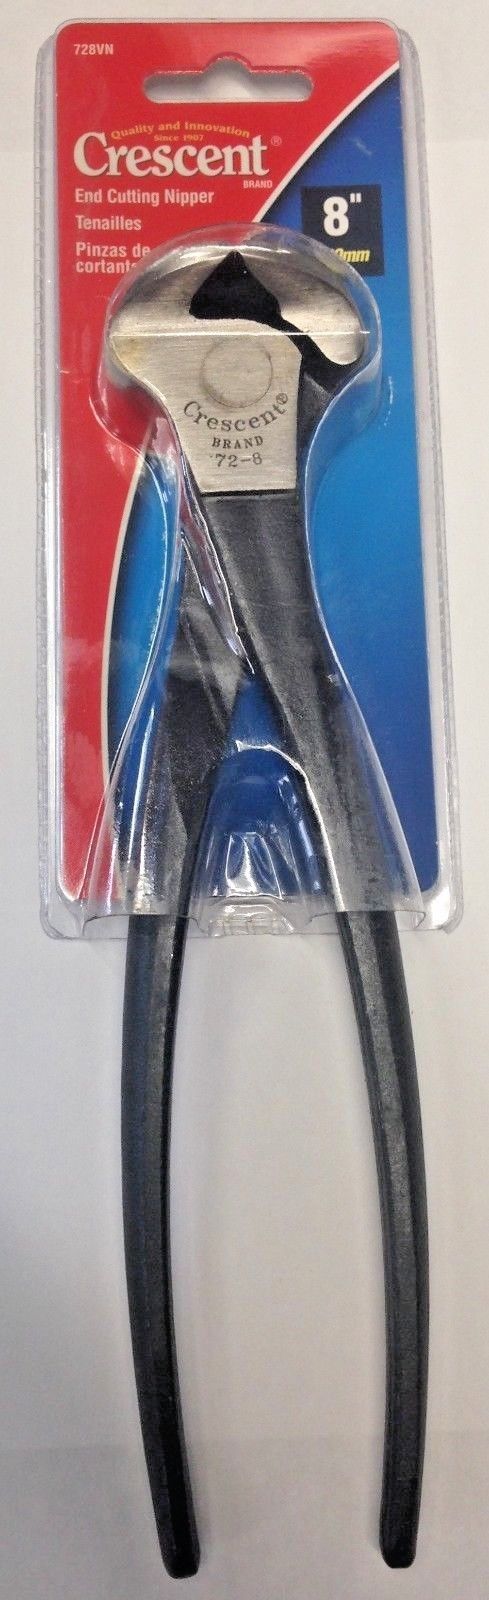 Crescent 728VN 8" Solid Joint End Cutting Nipper / Pliers